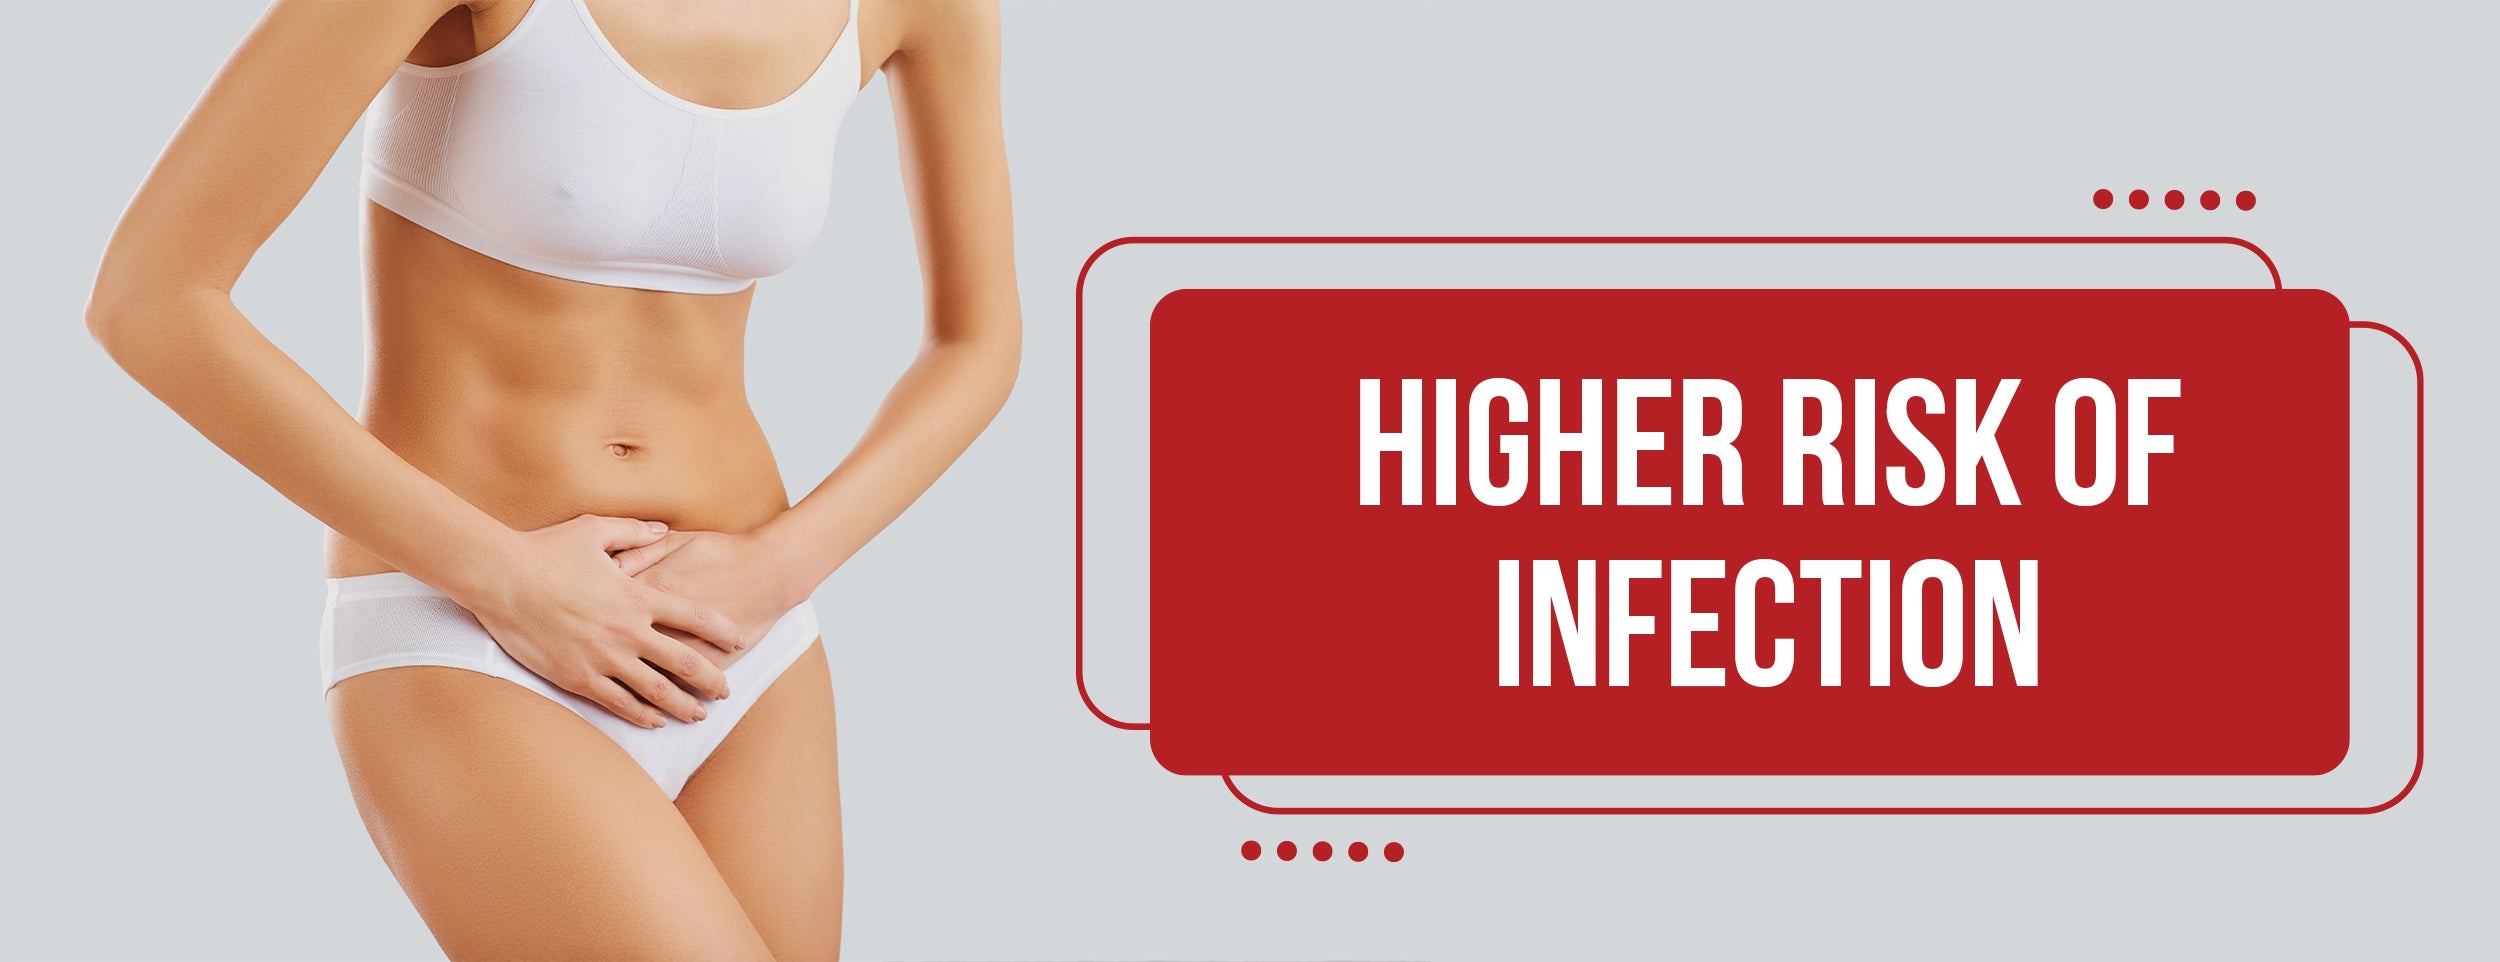 Higher Risk of Infection